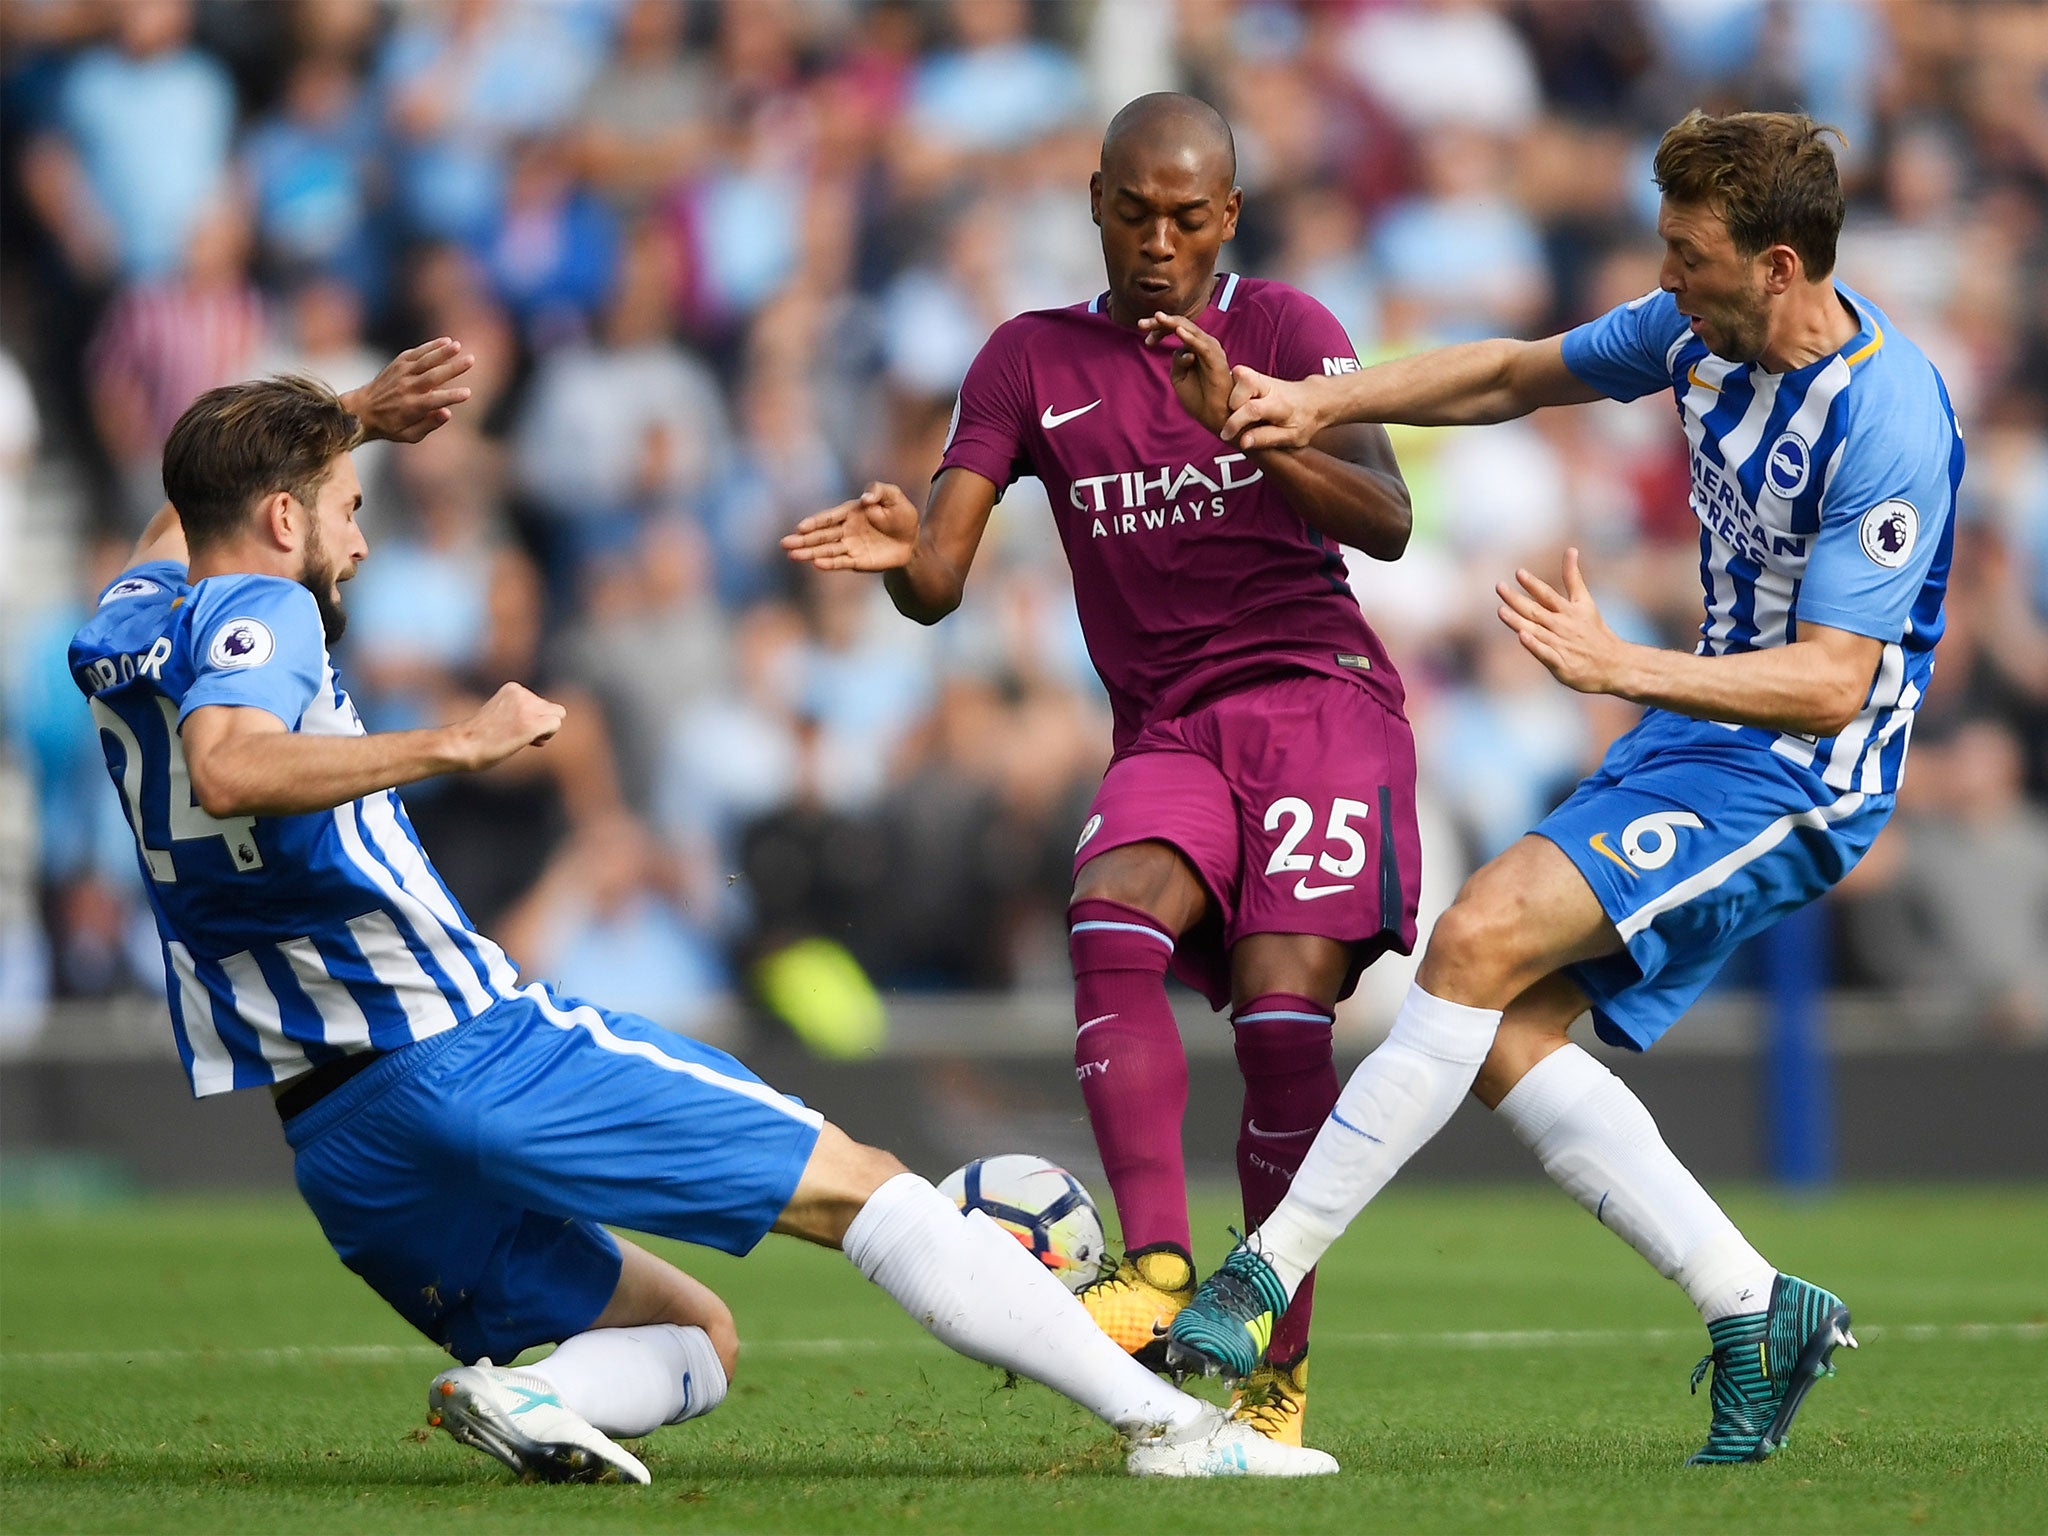 Brighton took on Man City in their first-ever Premier League match